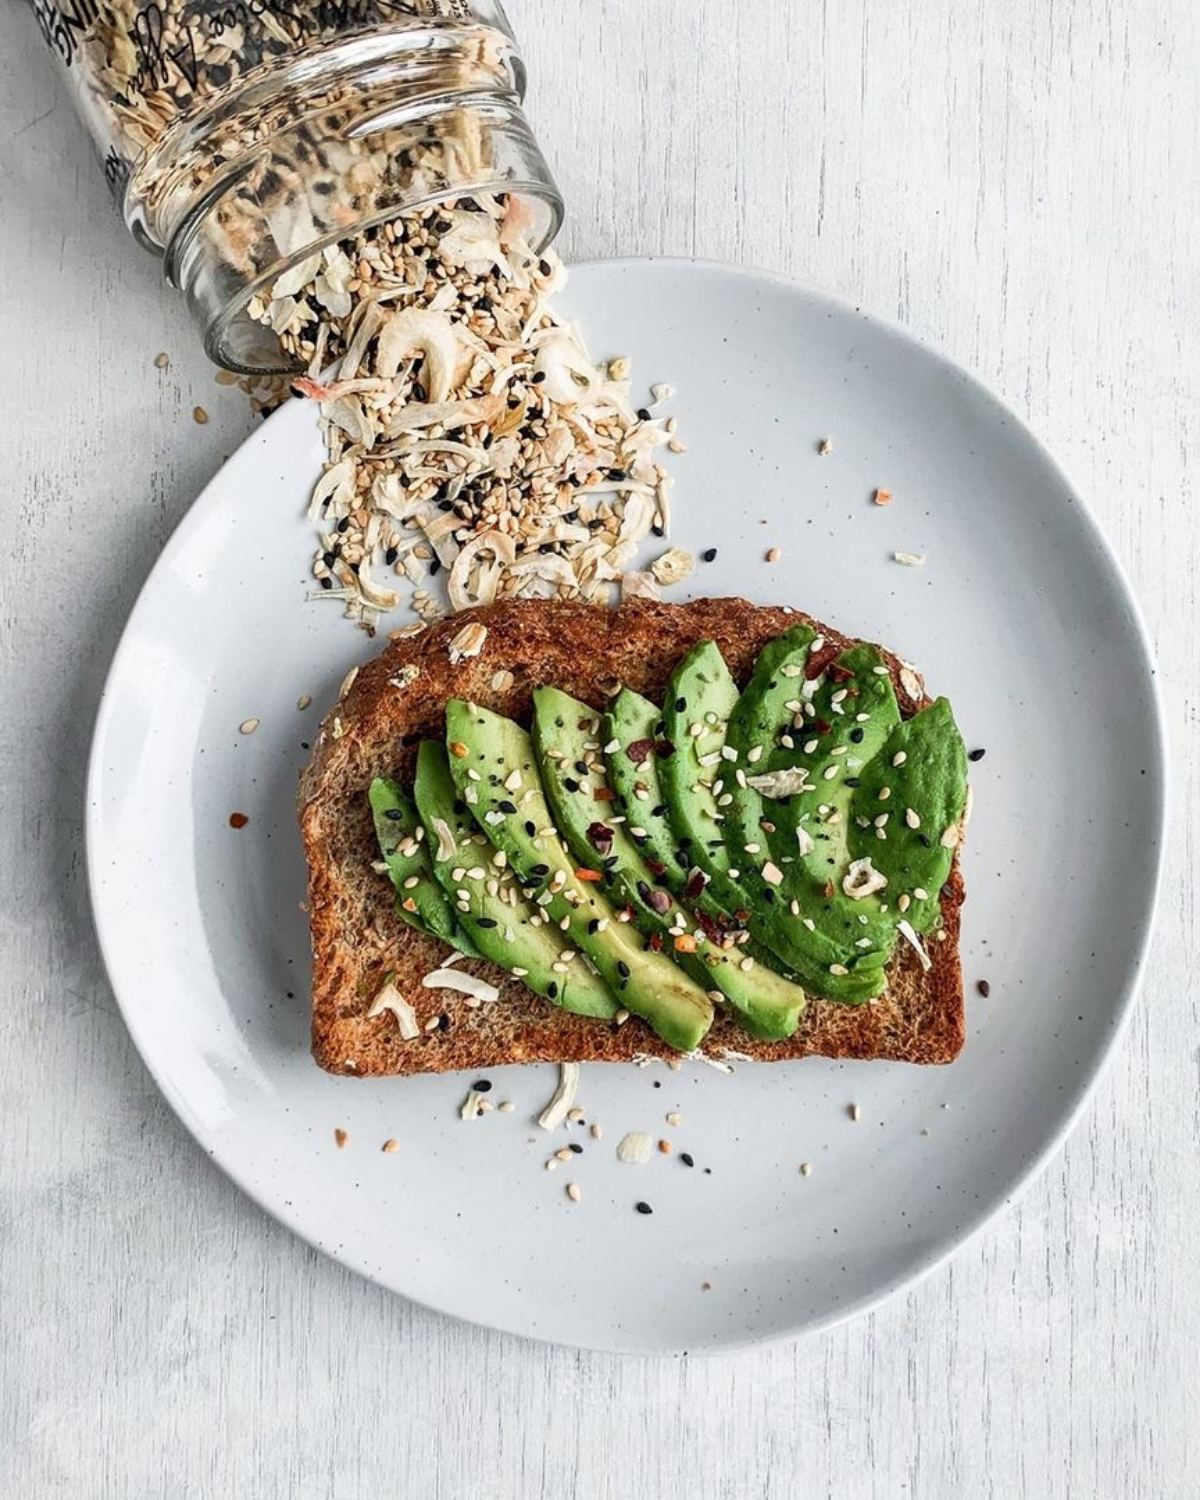 AVO-TOAST WITH EVERYTHING BAGEL SEASONING – A Spice Affair.